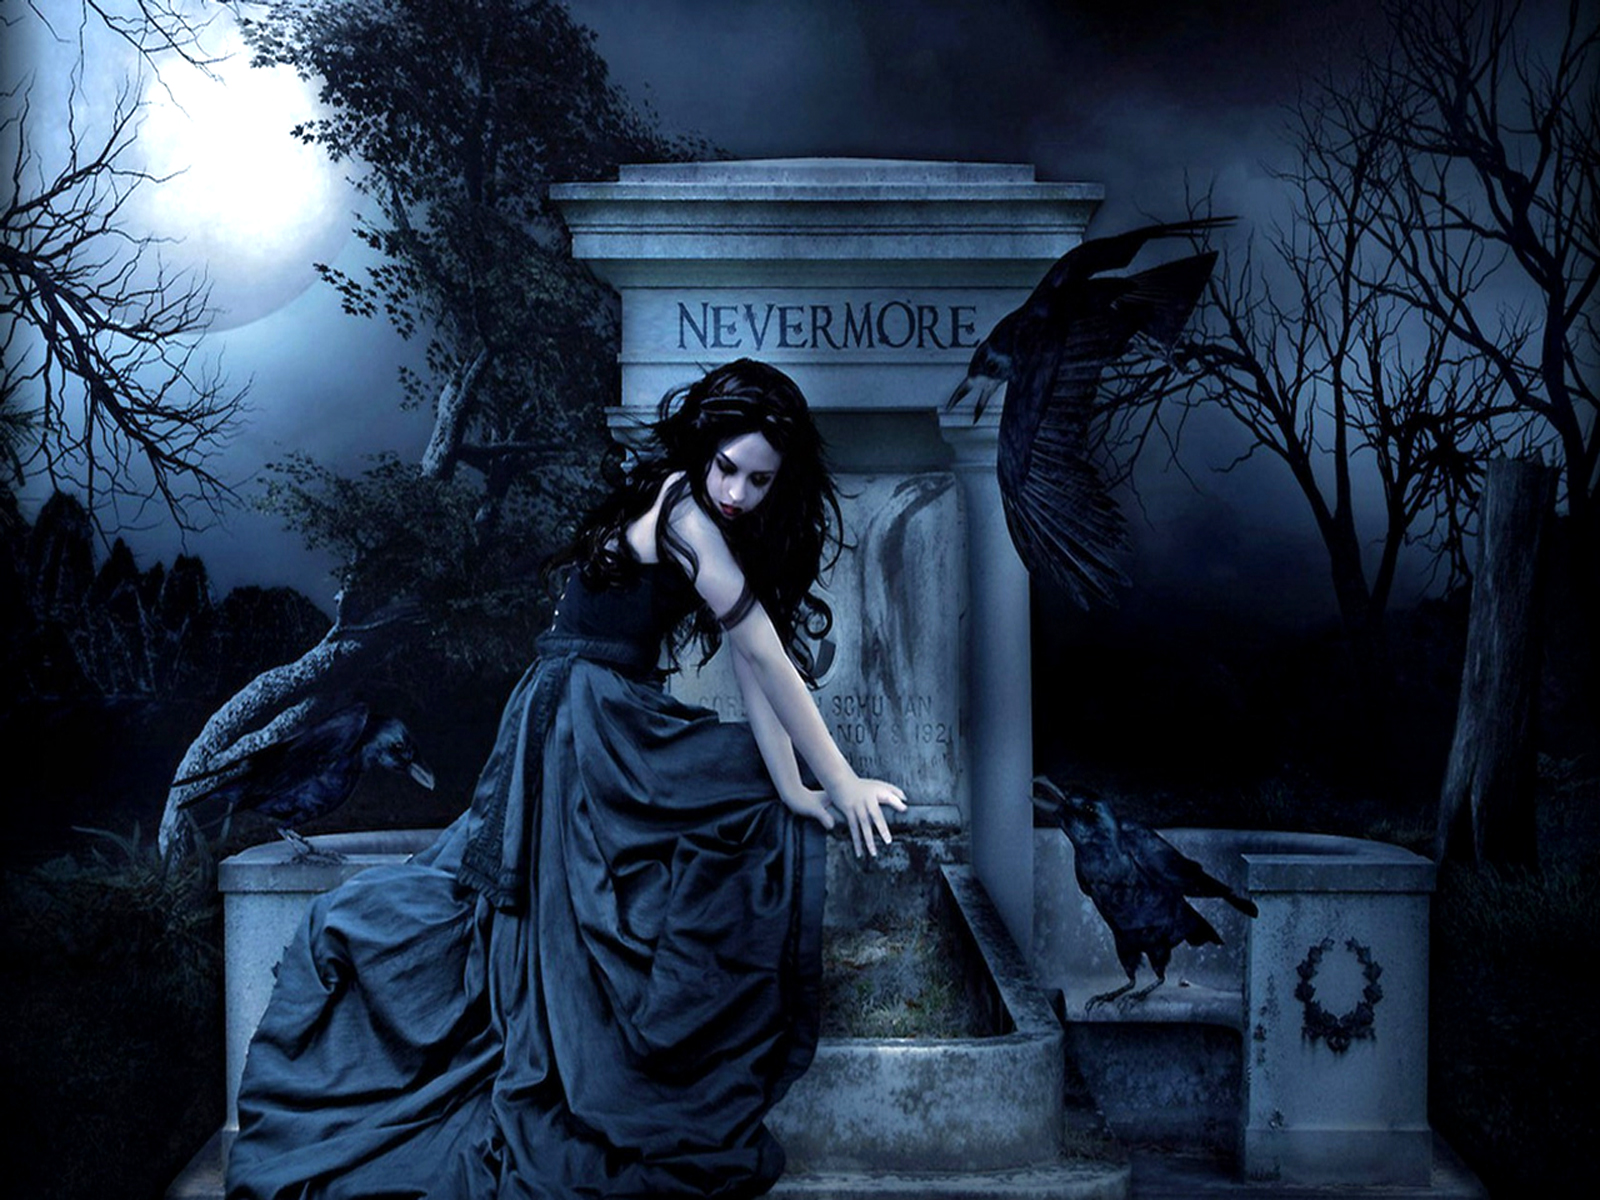 nevermore wallpaper,darkness,photography,cemetery,goth subculture,fiction